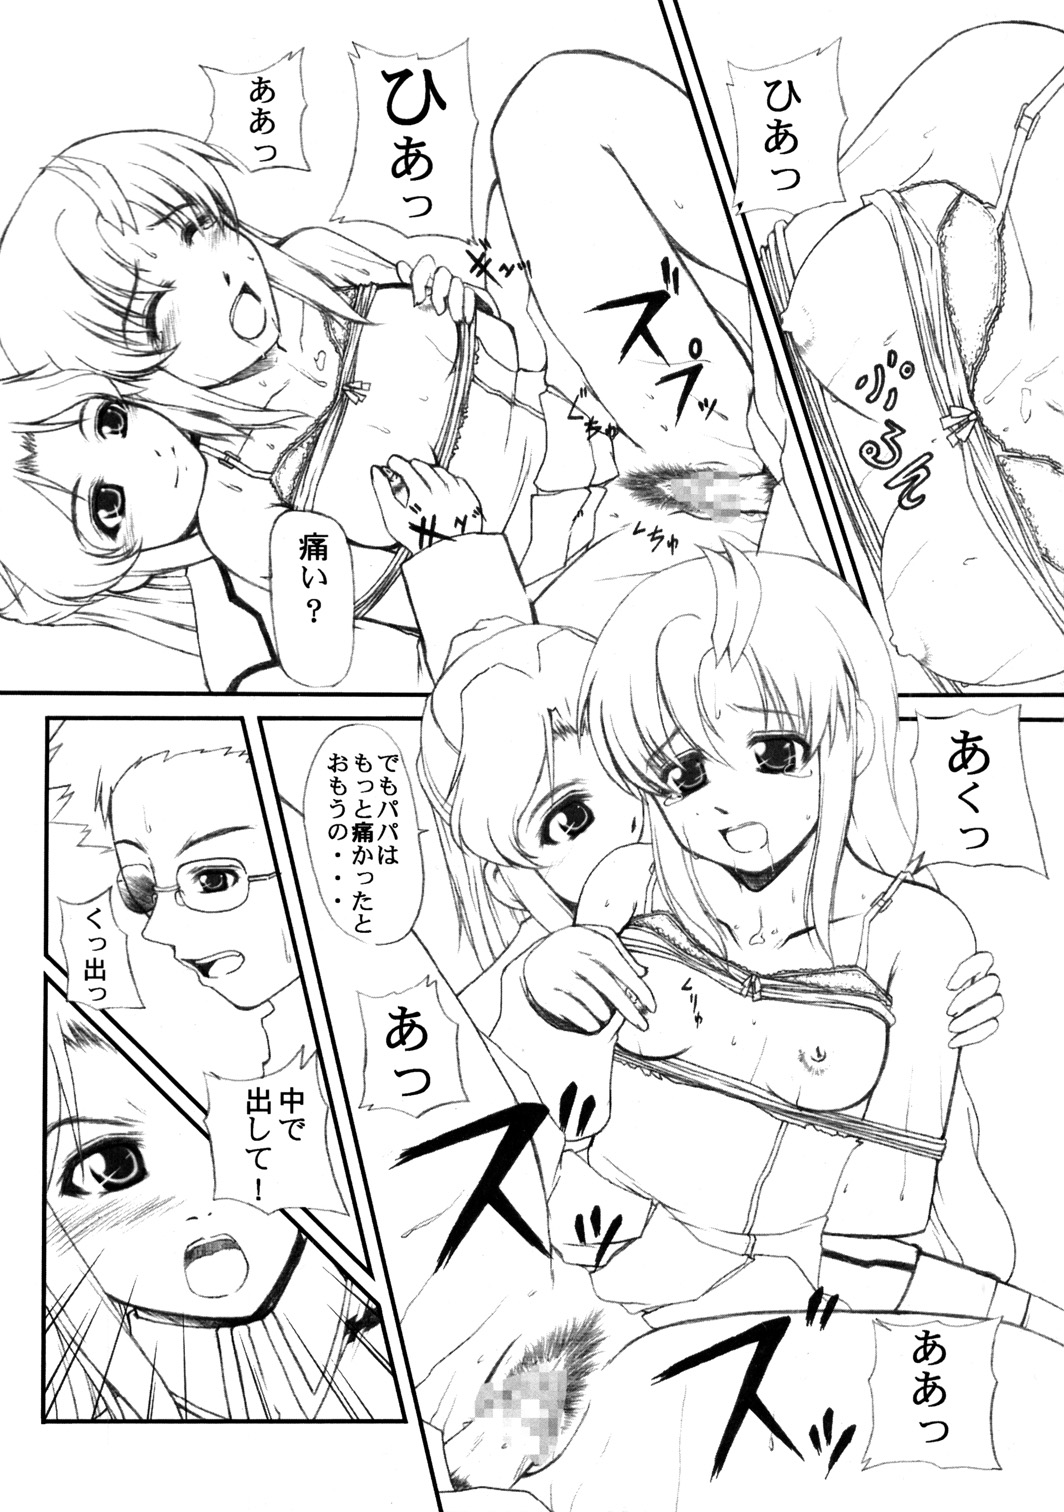 [Neo Frontier] My Milky Way Extra [Gundam Seed] page 6 full